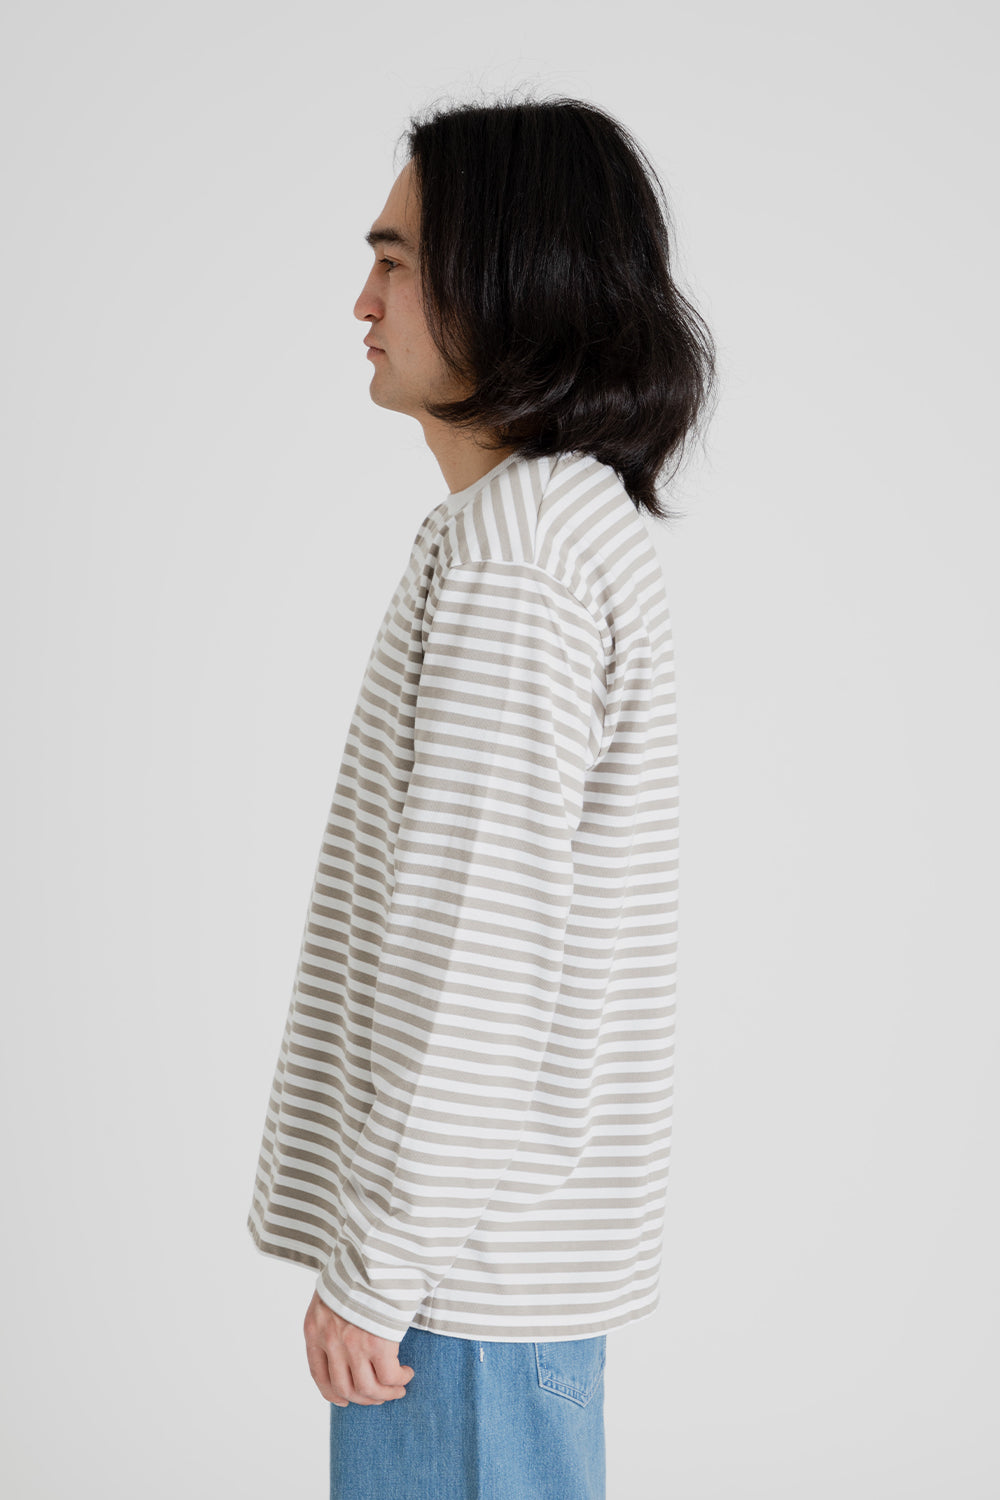 Nanamica Coolmax St Jersey Long Sleeve Tee in Taupe and White